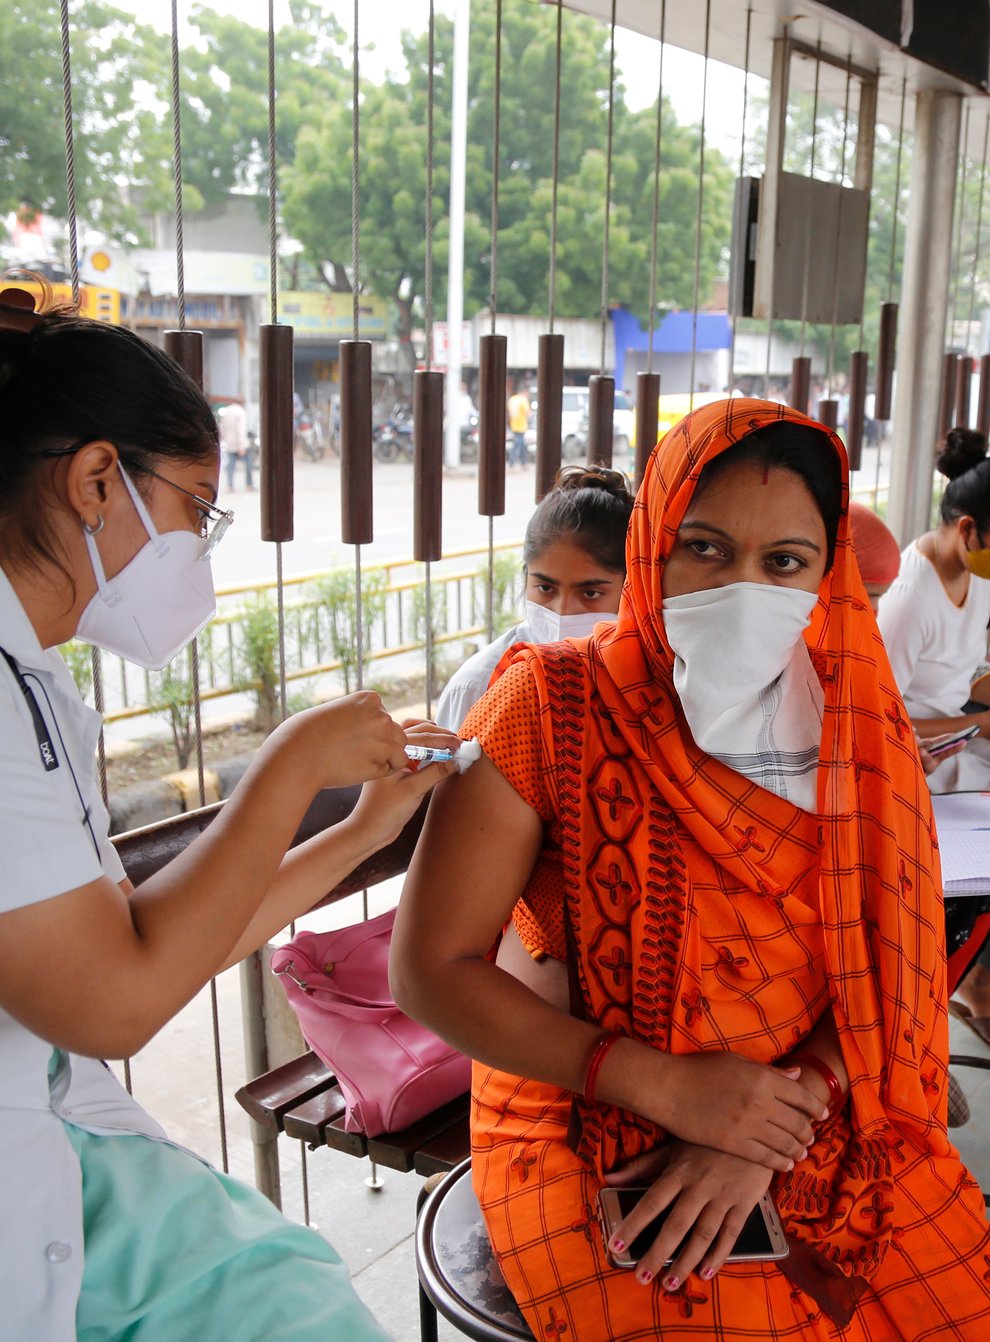 A health worker administers the vaccine for COVID-19 during a special vaccination drive by the municipal corporation at a bus stand in Ahmedabad, India, Friday, Sept. 17, 2021. (AP Photo/Ajit Solanki)